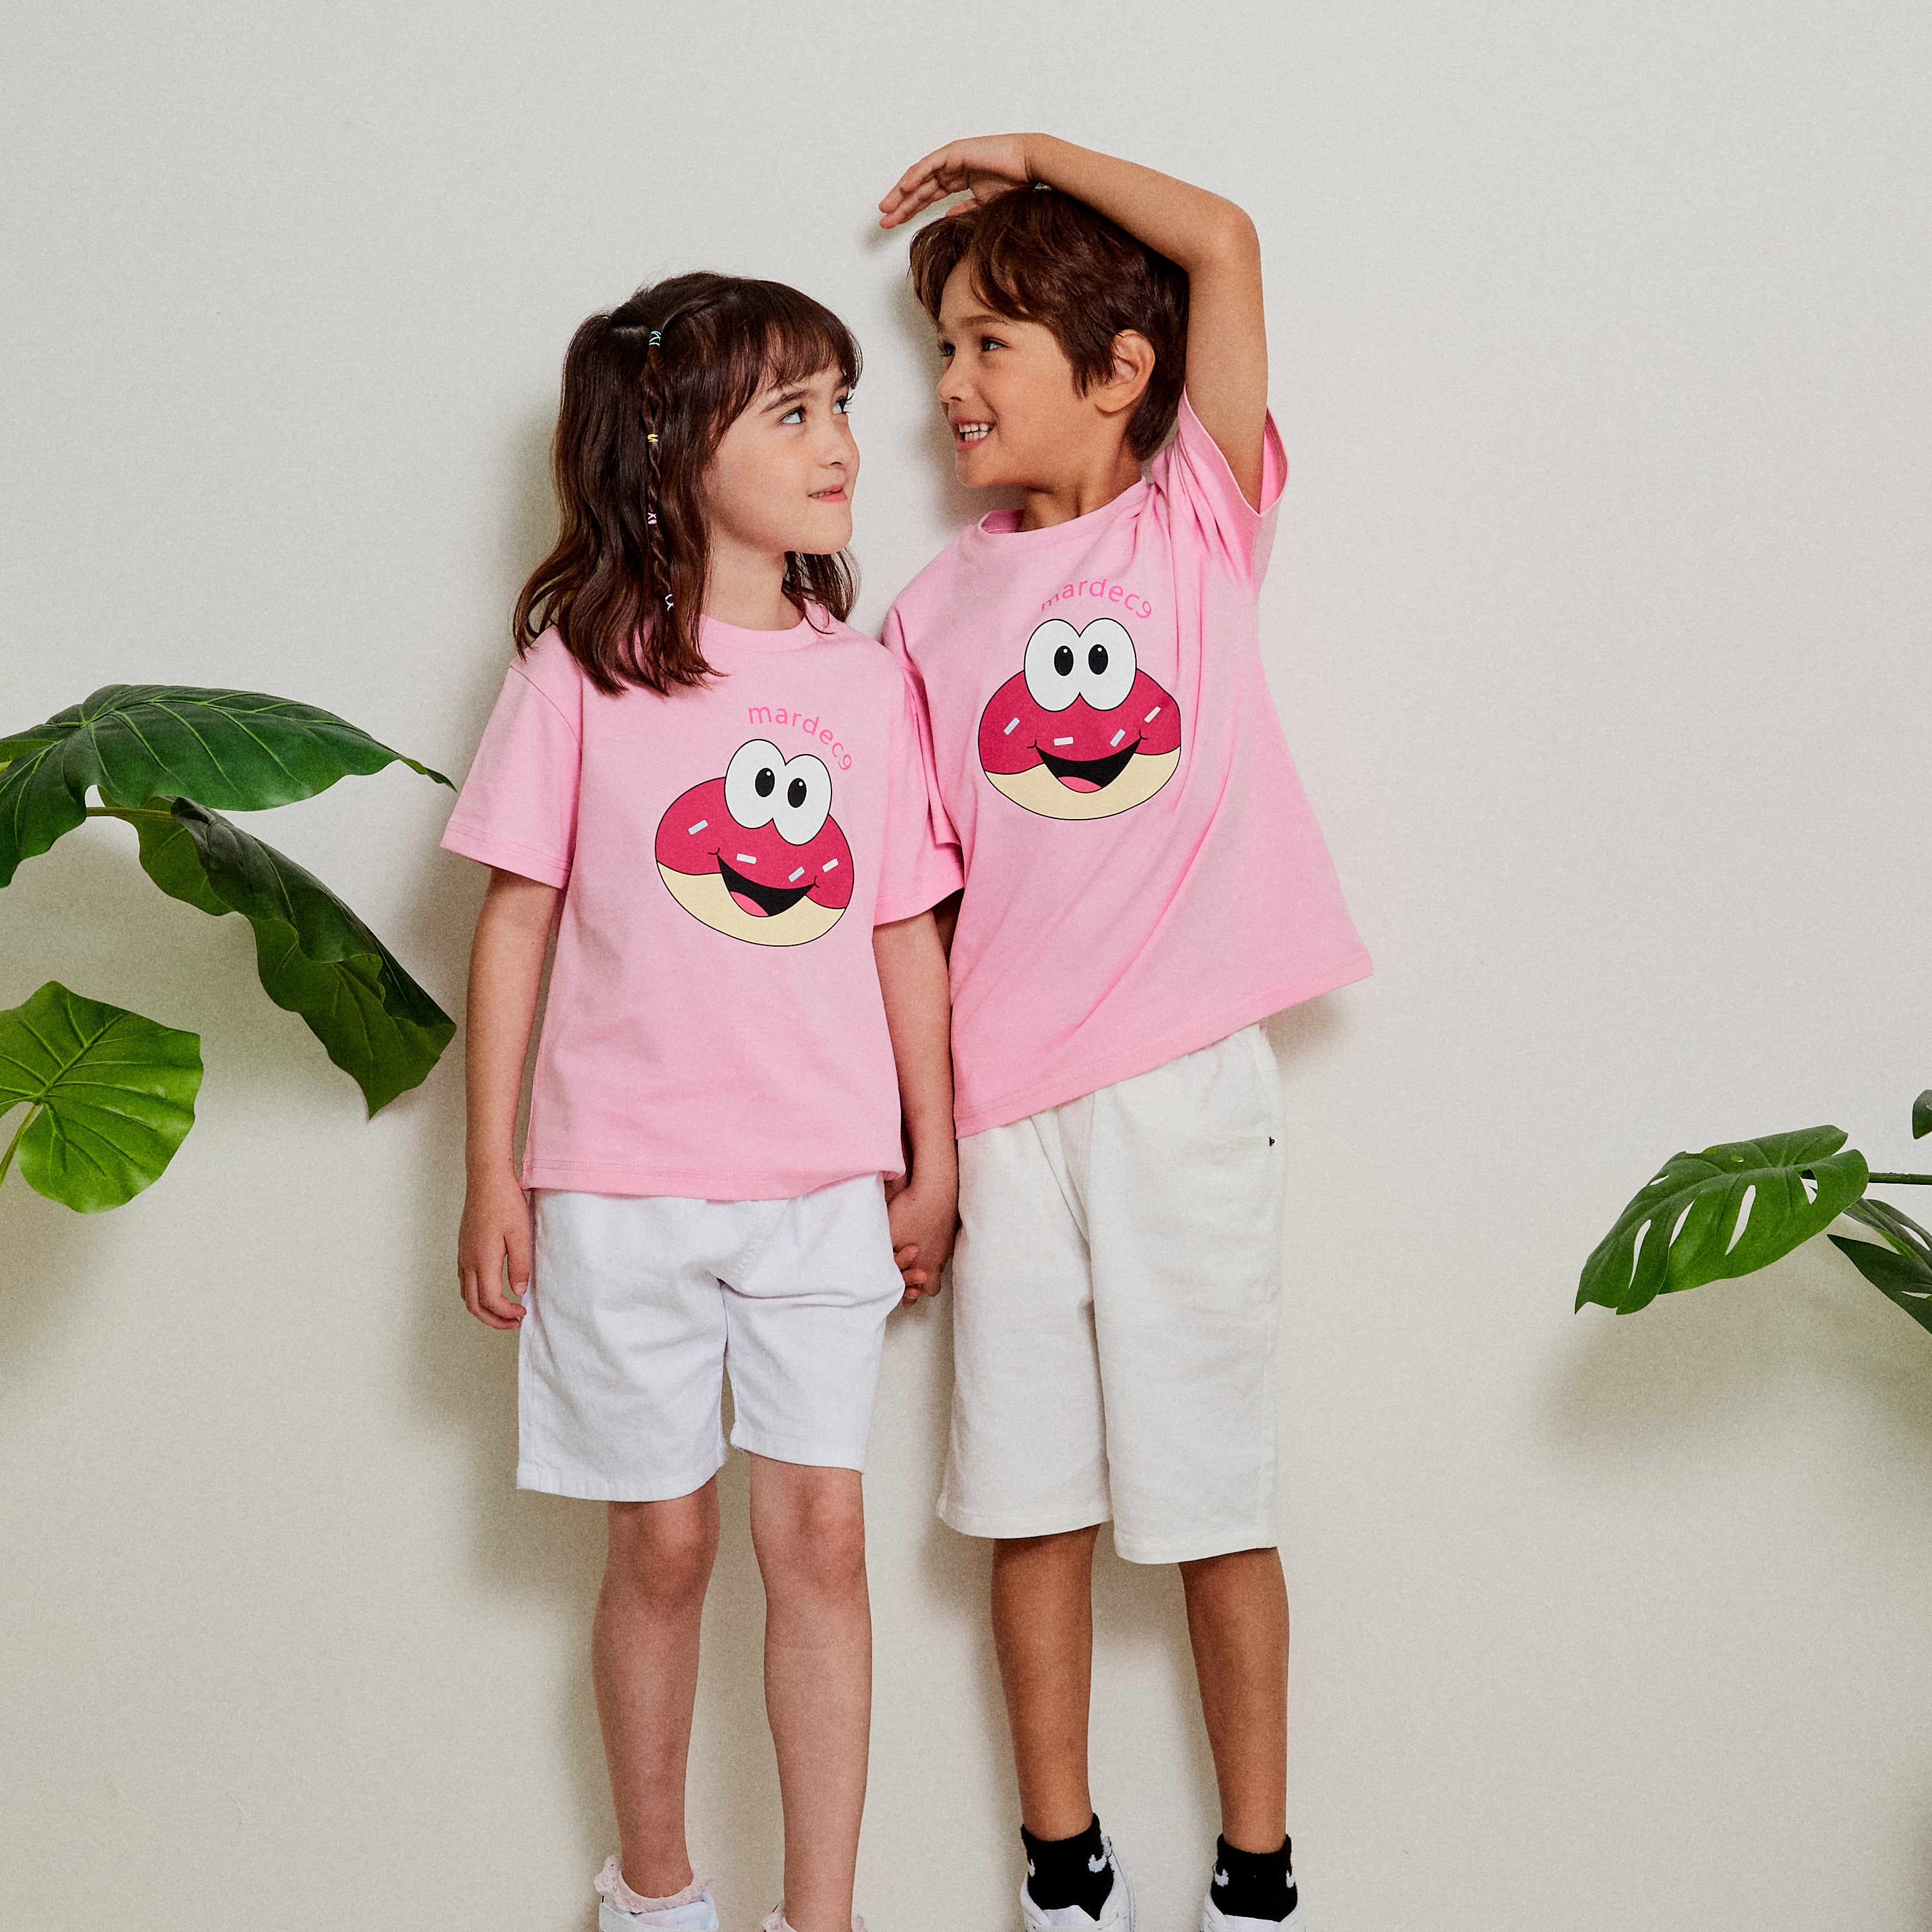 Pink Donut T-Shirts: Sweetest Styles for Boys & Girls!